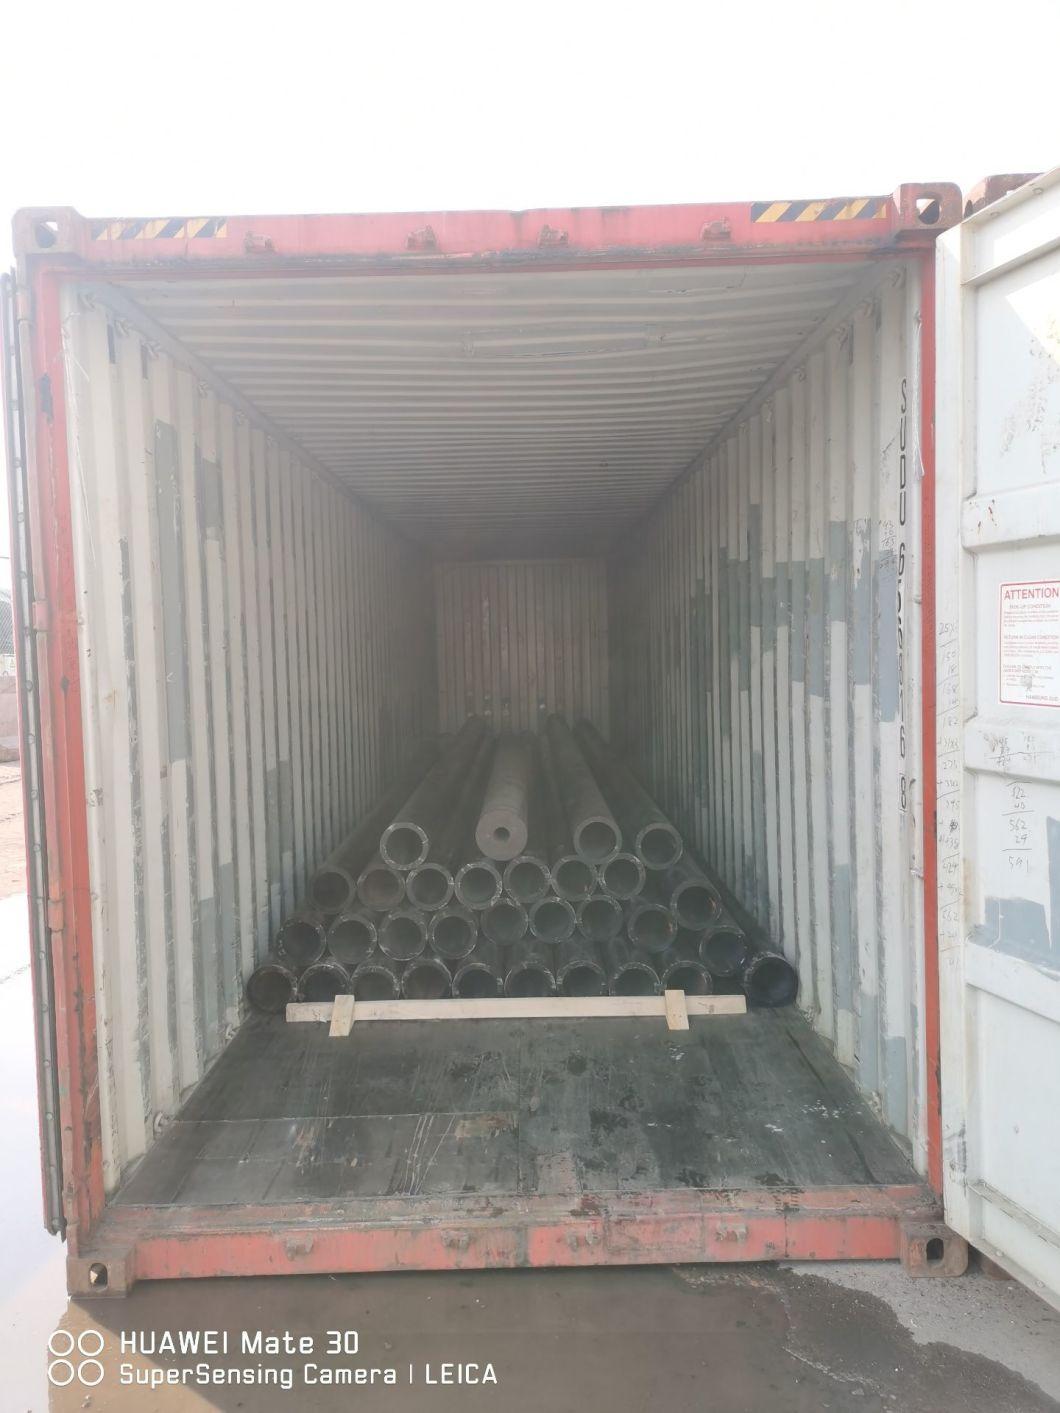 Cold Drawn DIN 2391 Hydraulic Cylinder Tube St52 Carbon Seamless Steel Tube